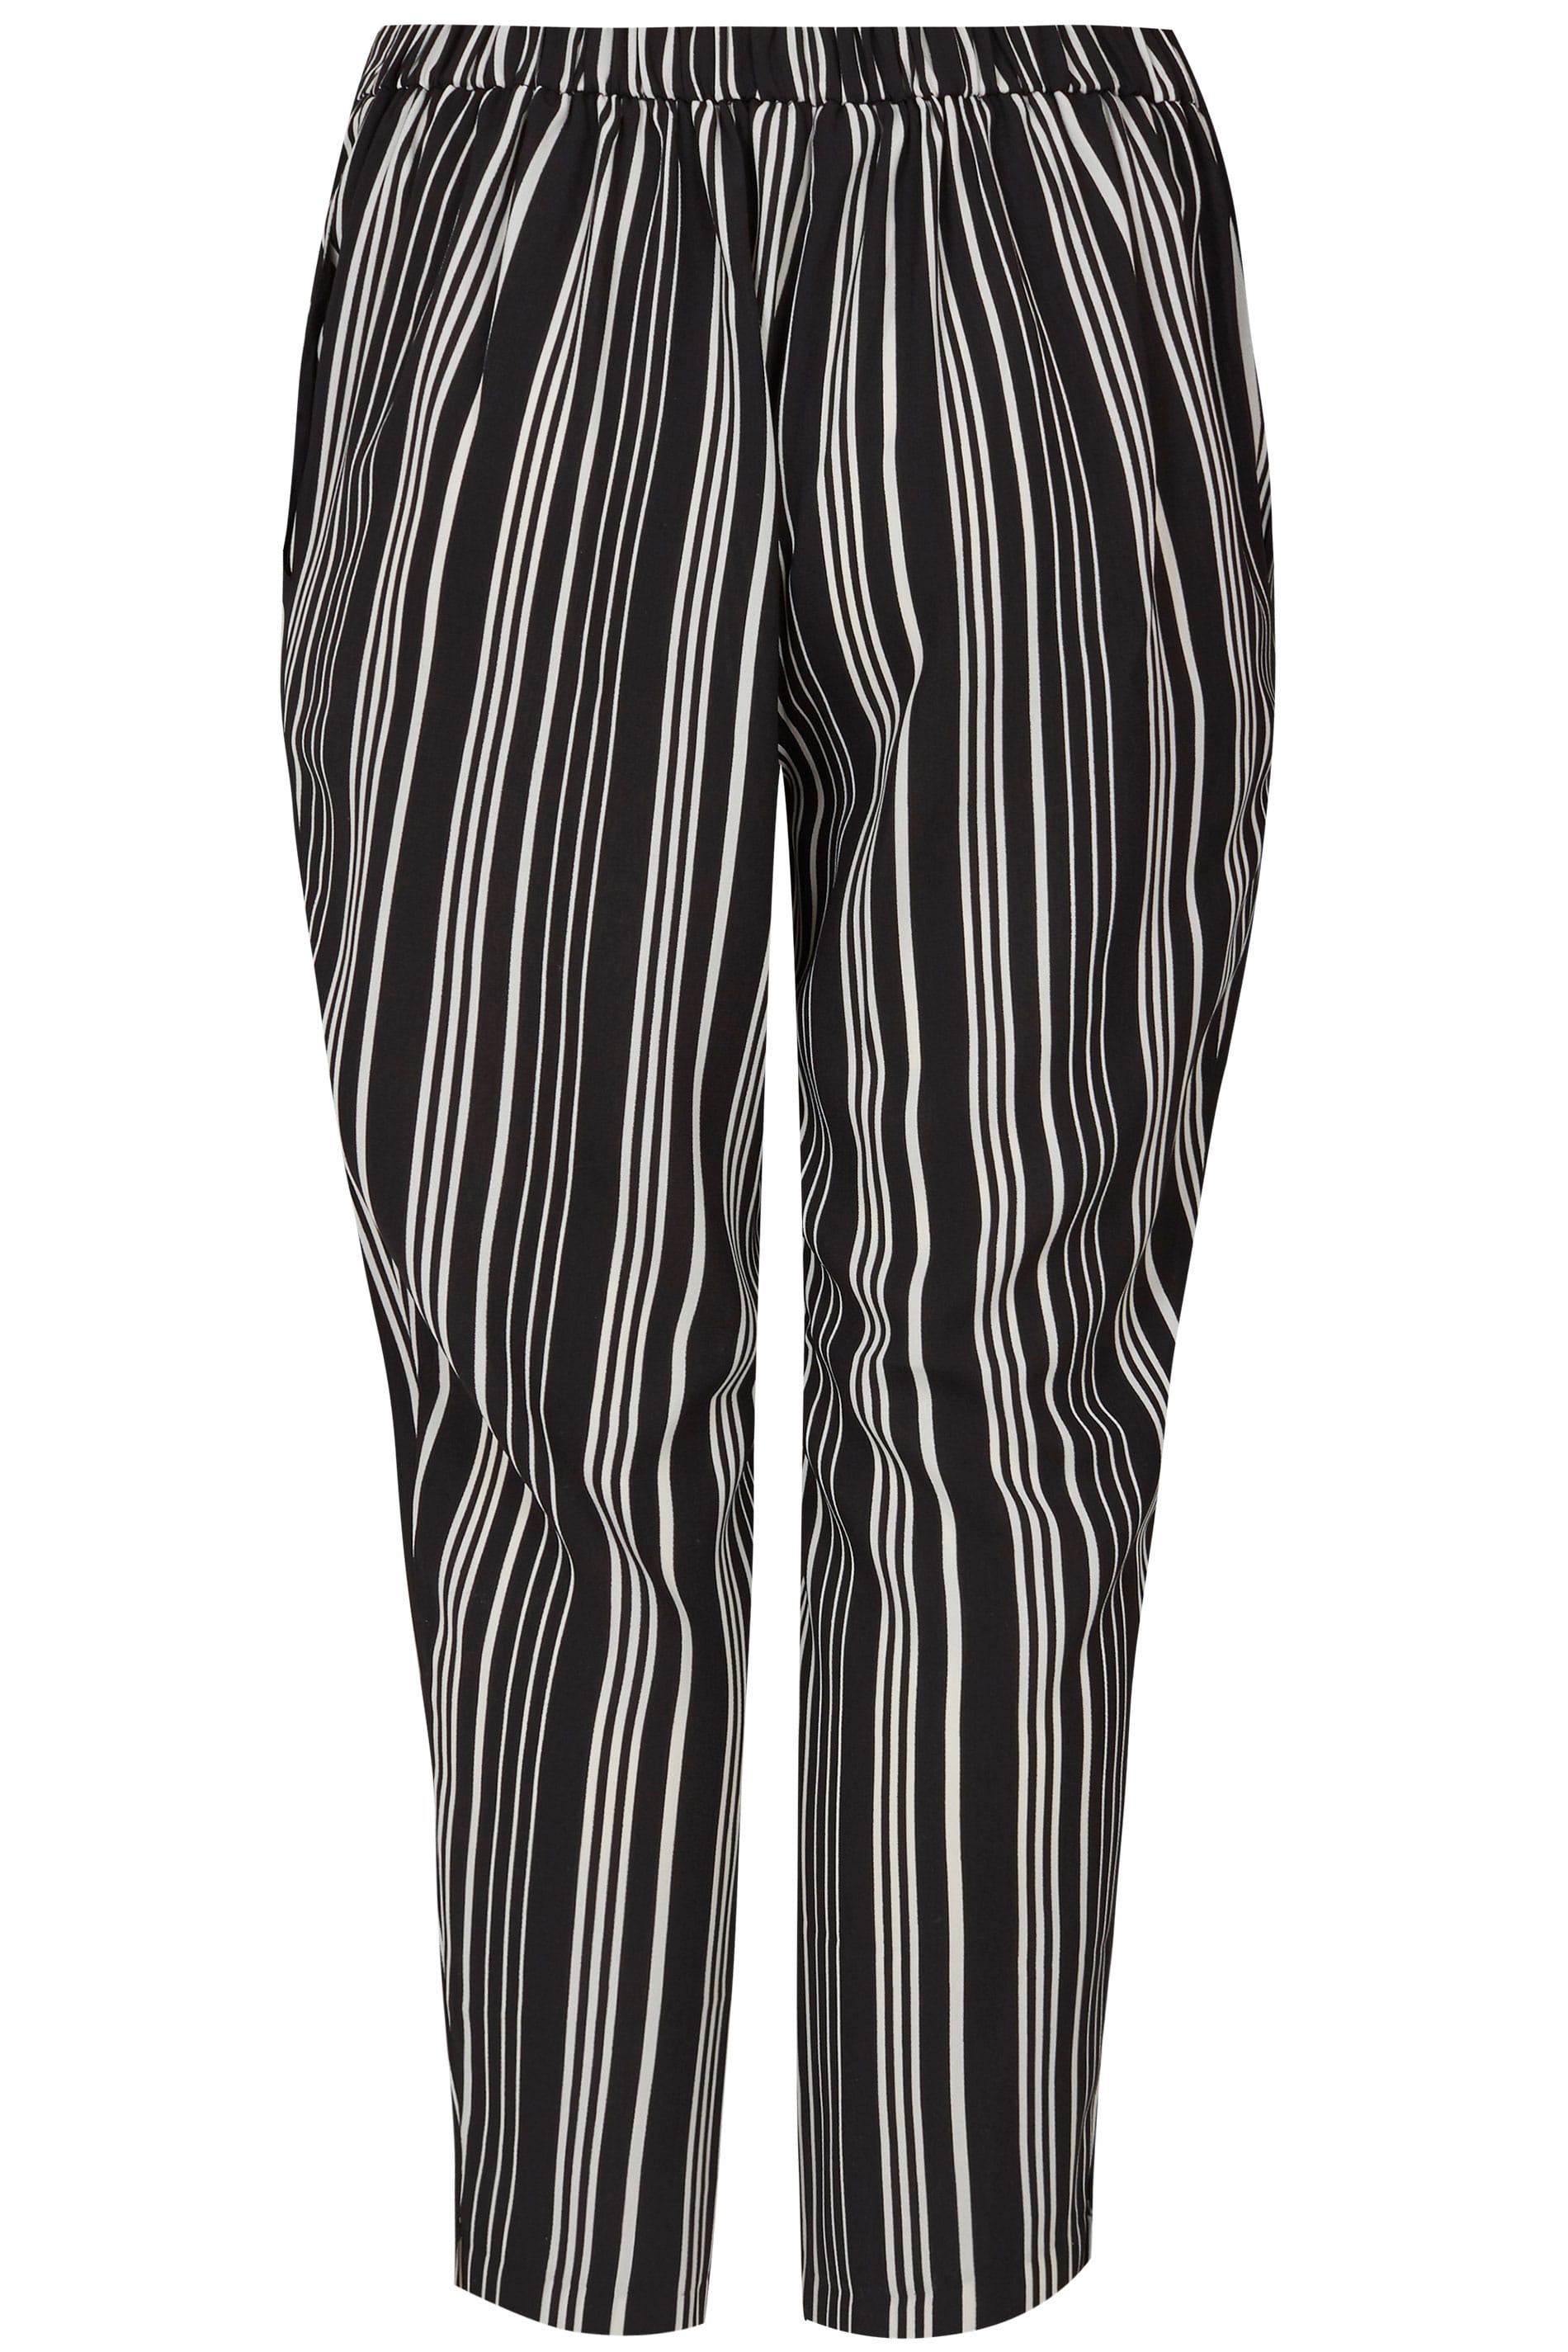 Plus Size Black & White Stripe Tapered Trouser | Sizes 16 to 36 | Yours ...